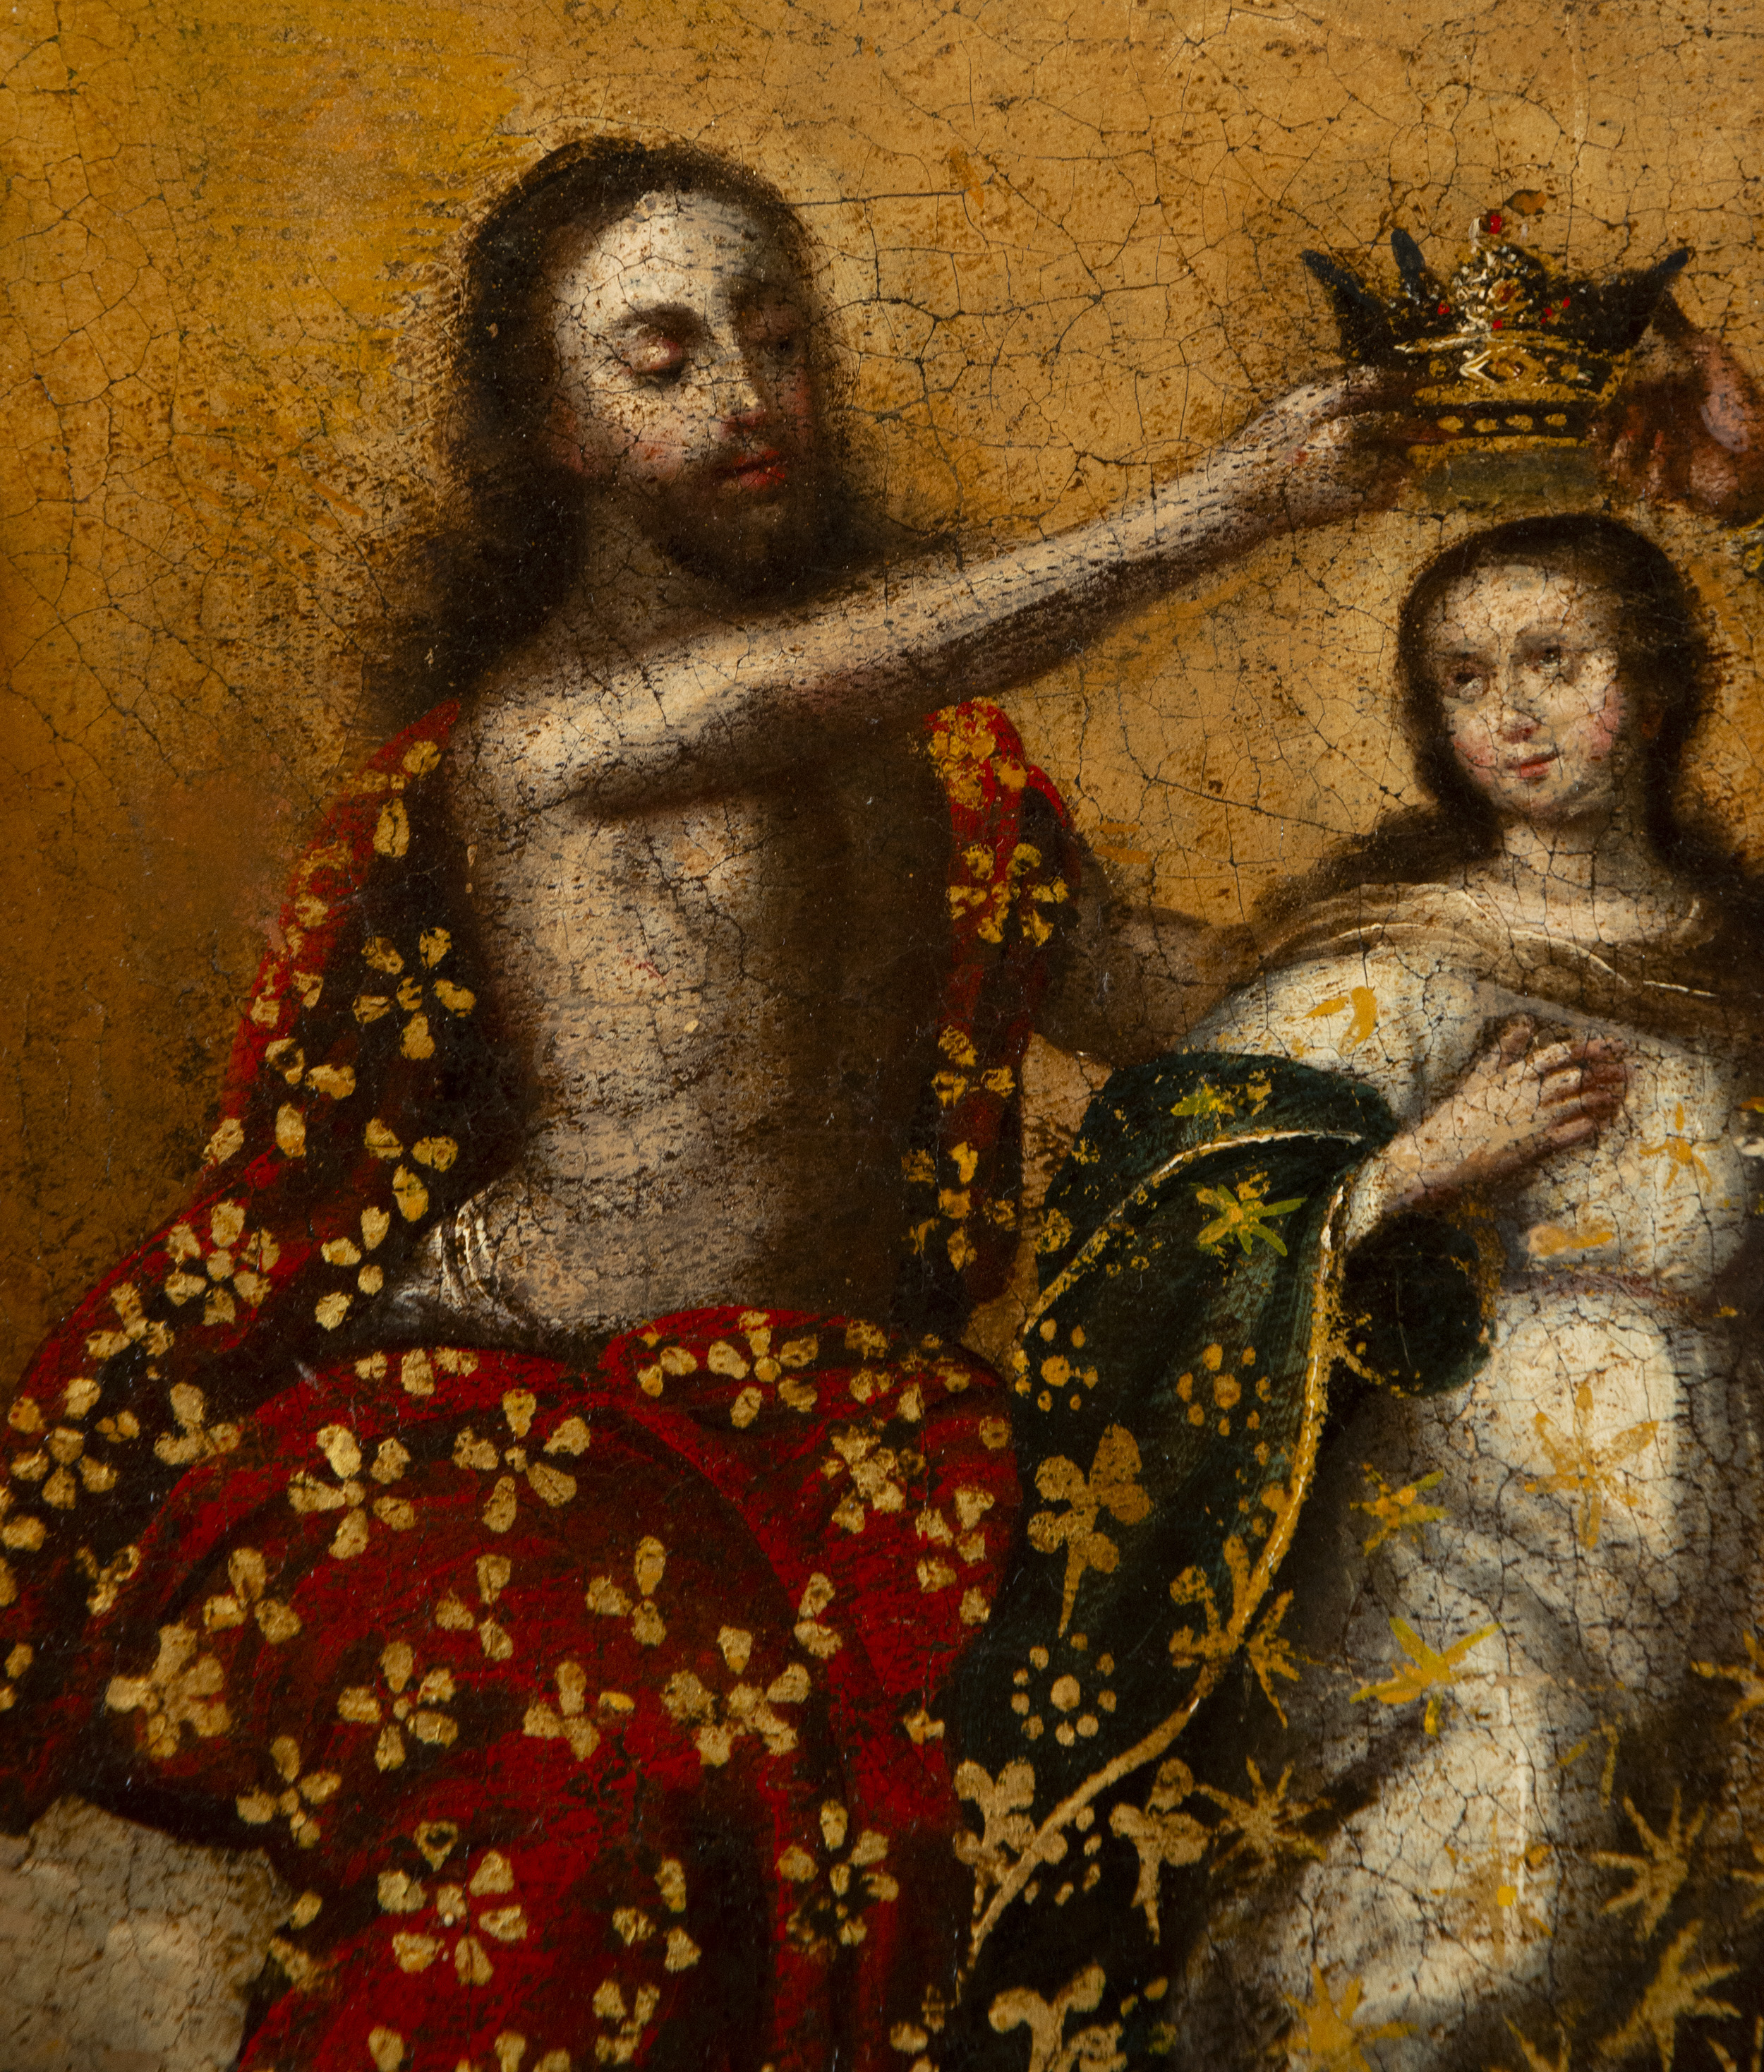 Exquisite Coronation of Mary, 18th century Spanish colonial school of Quito, present-day Ecuador - Image 7 of 12